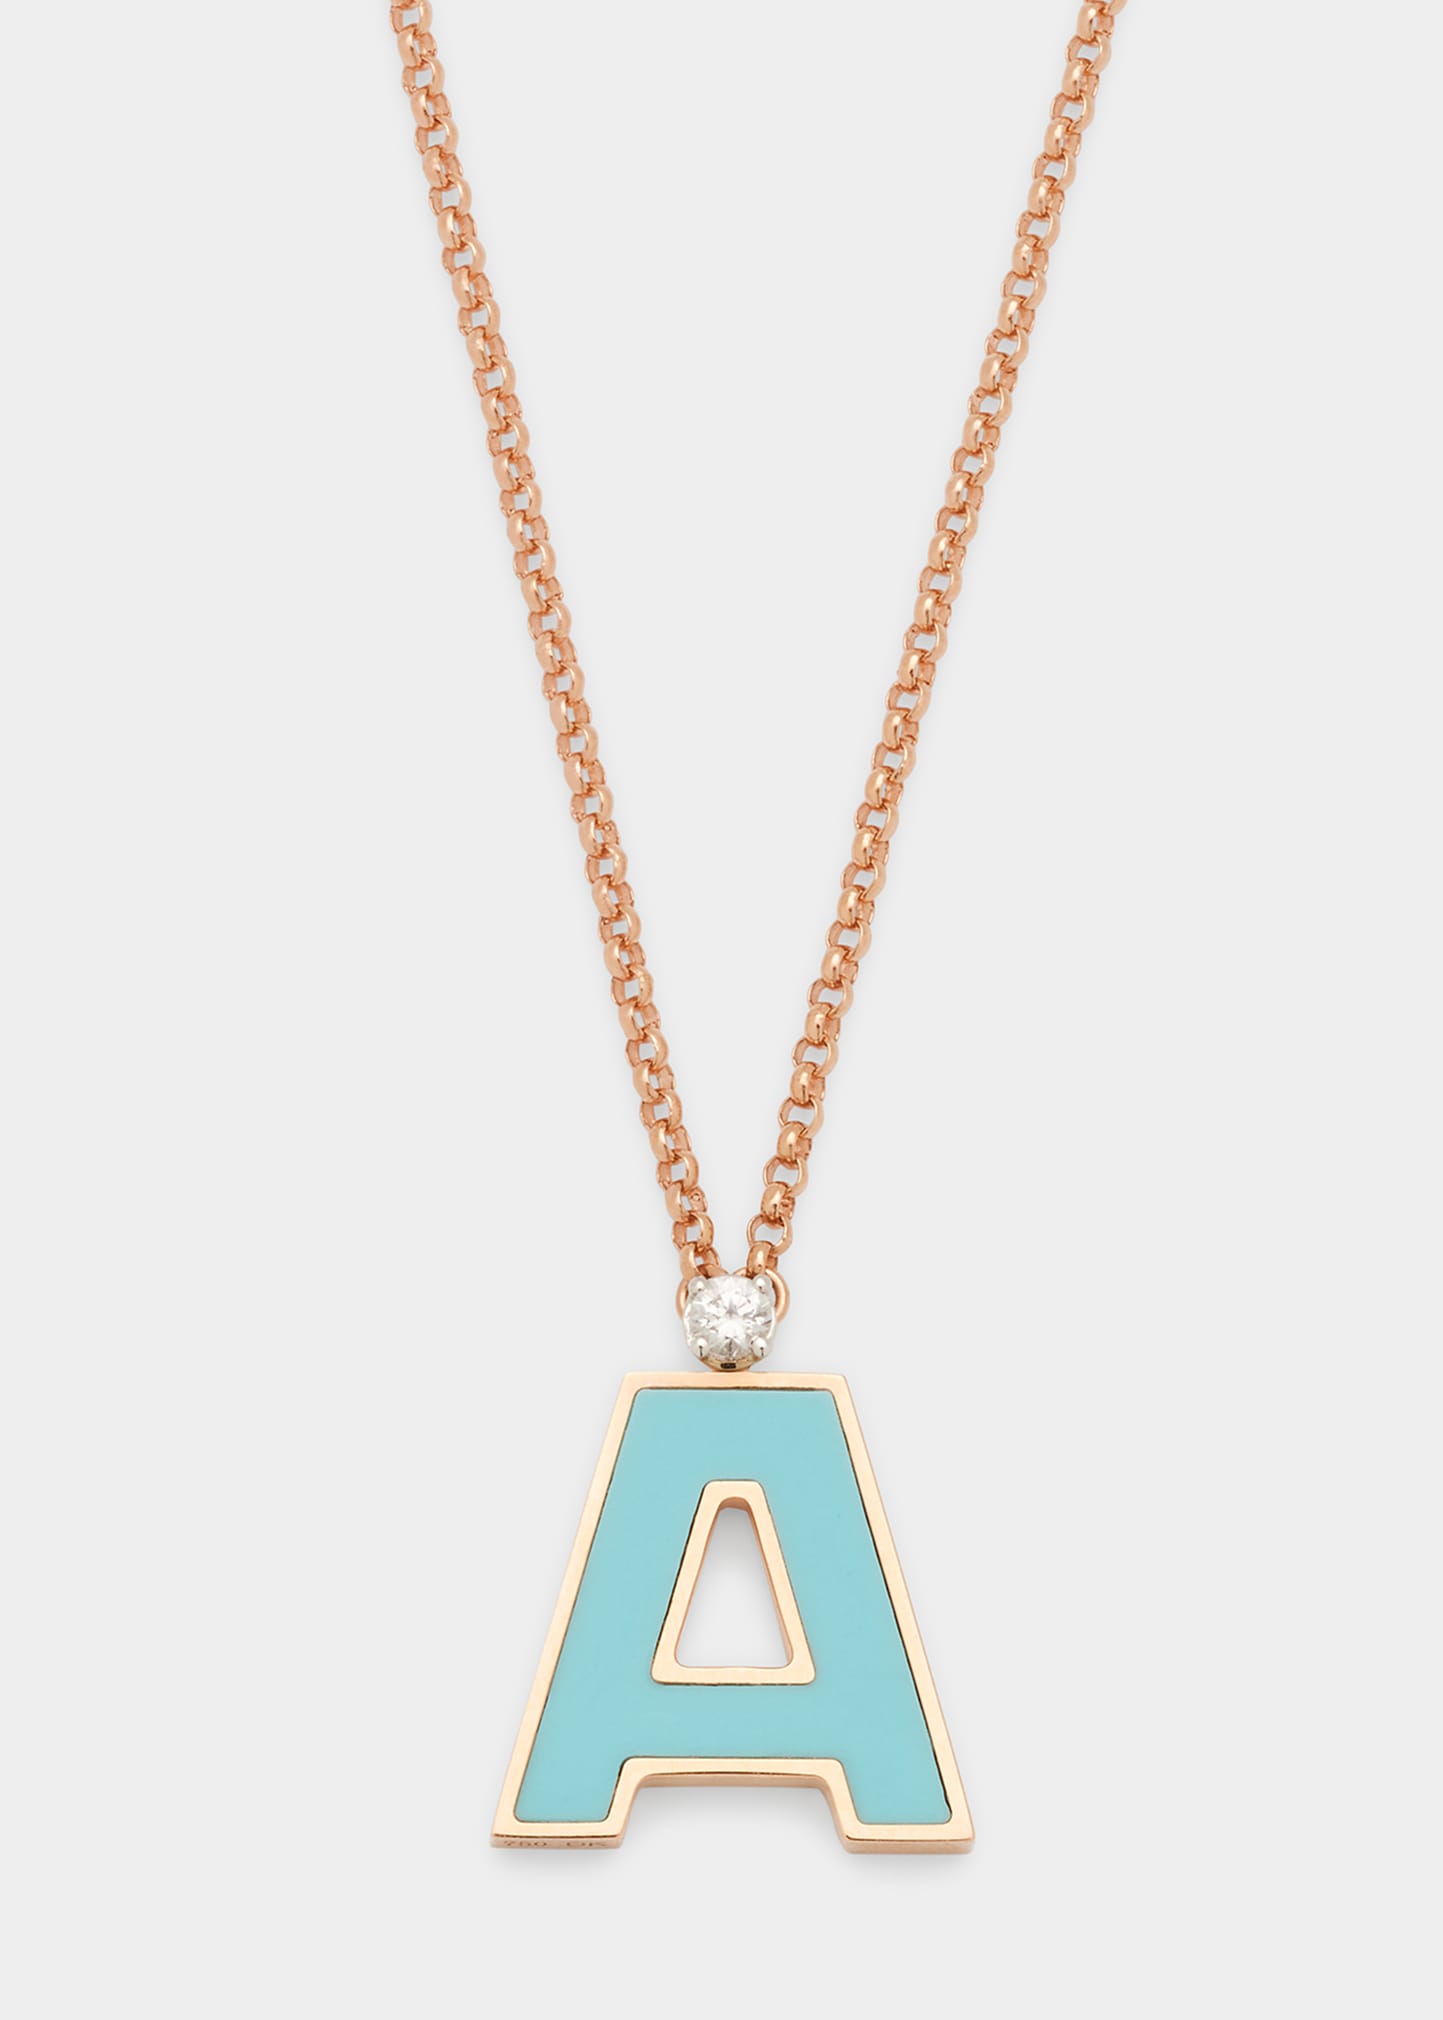 Rose Gold 'A' Letter Charm Necklace with Turquoise and White Sapphire